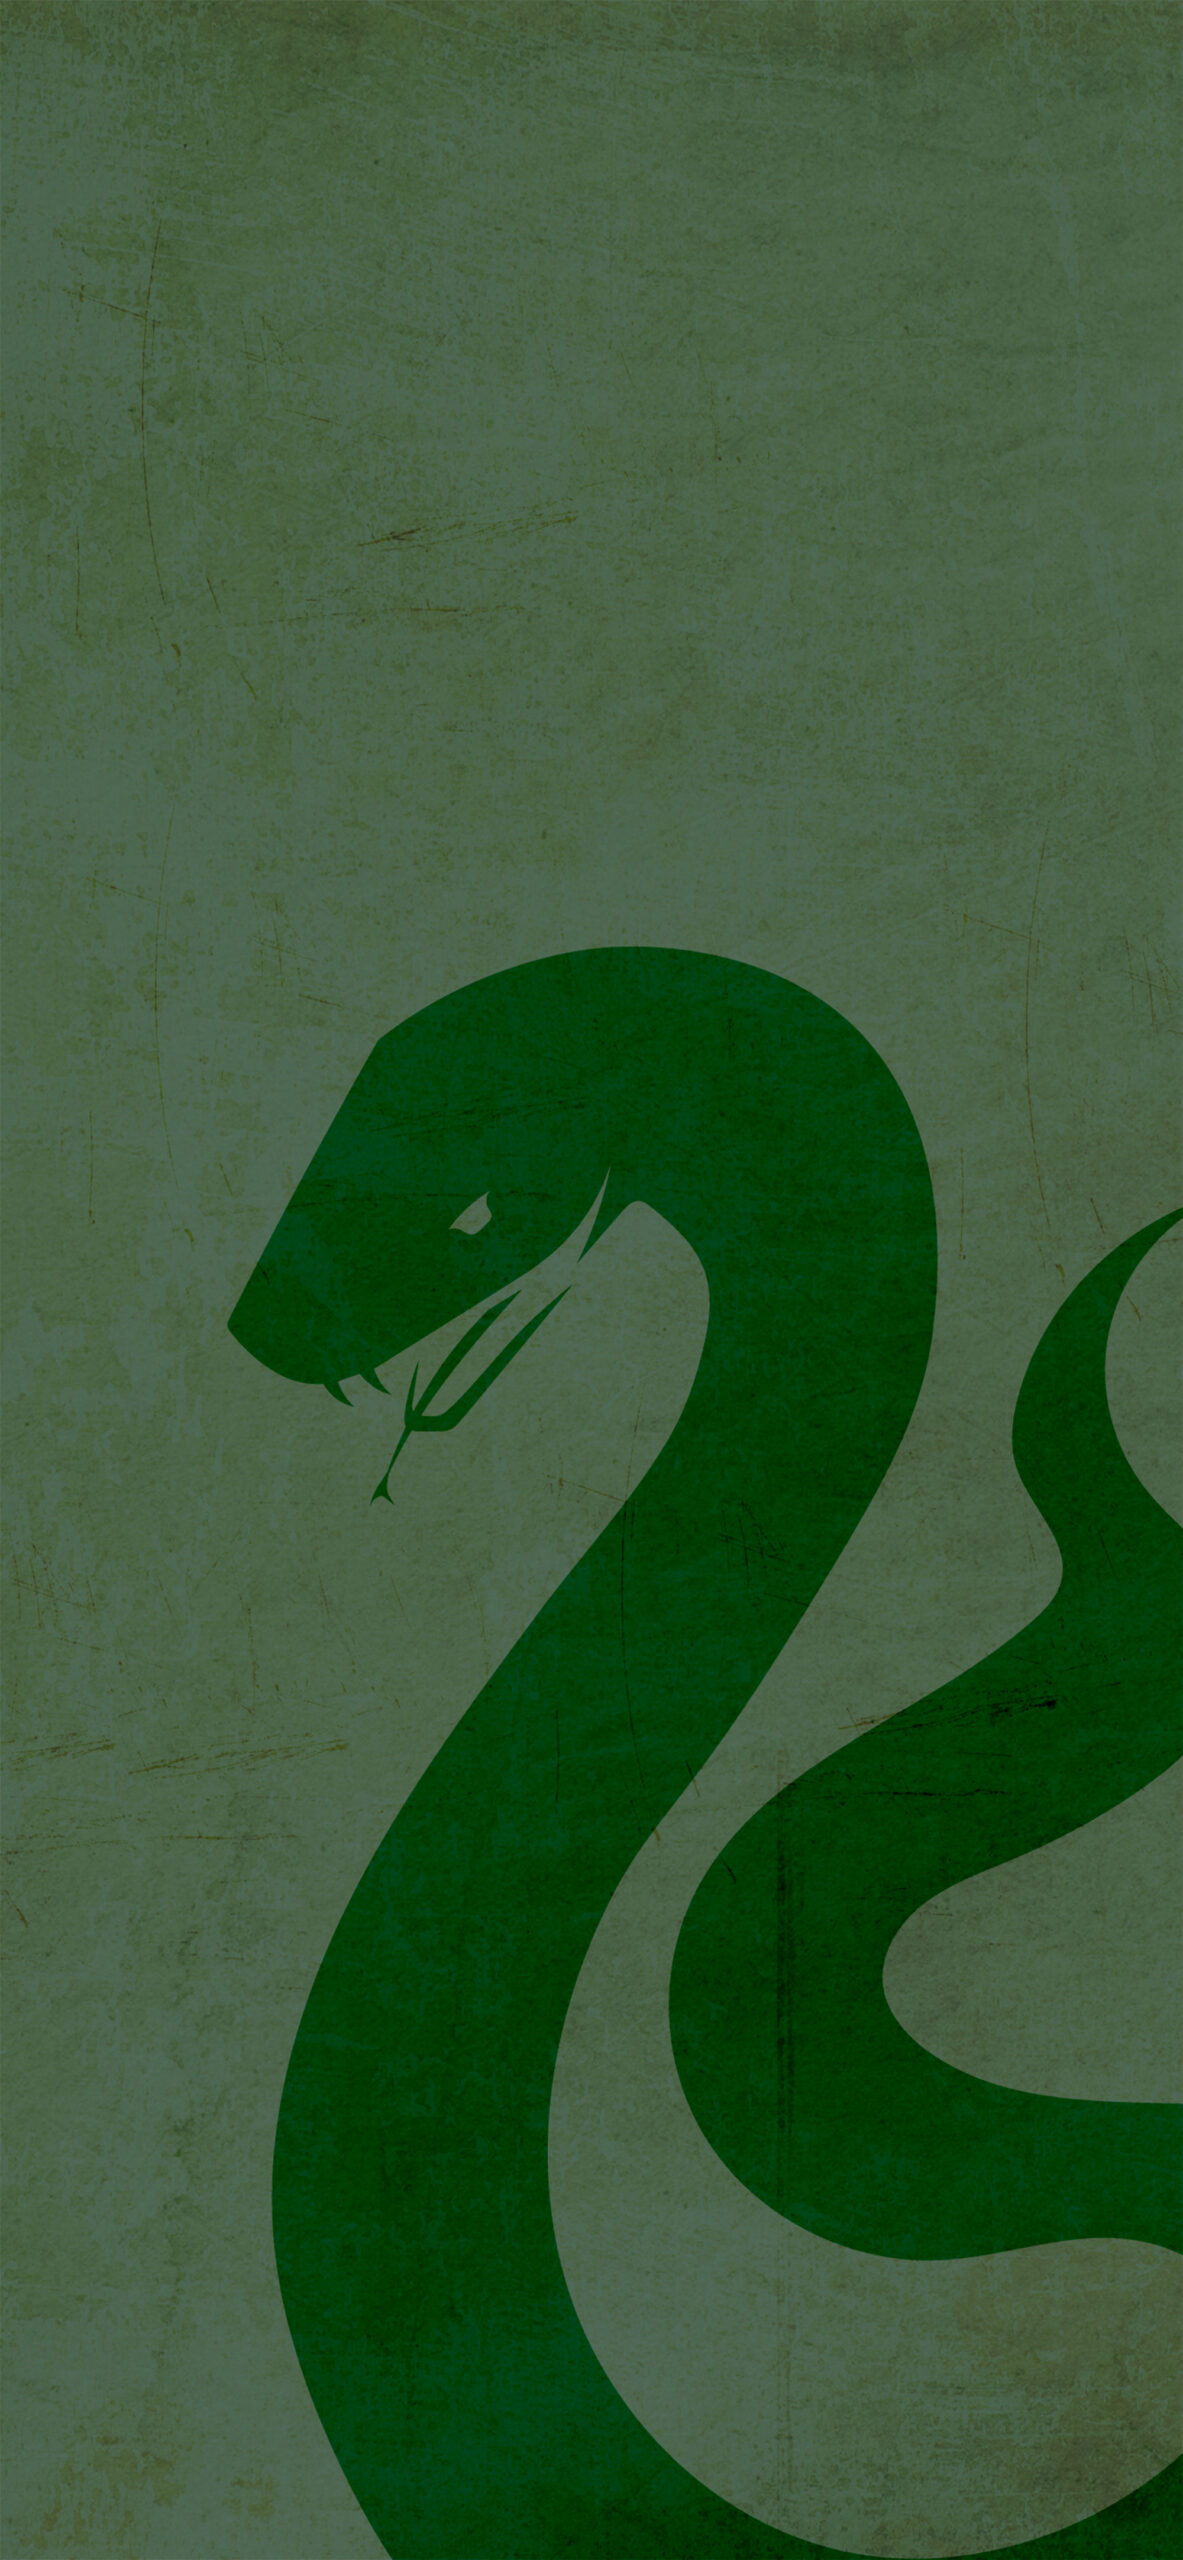 Slytherin House Wallpapers